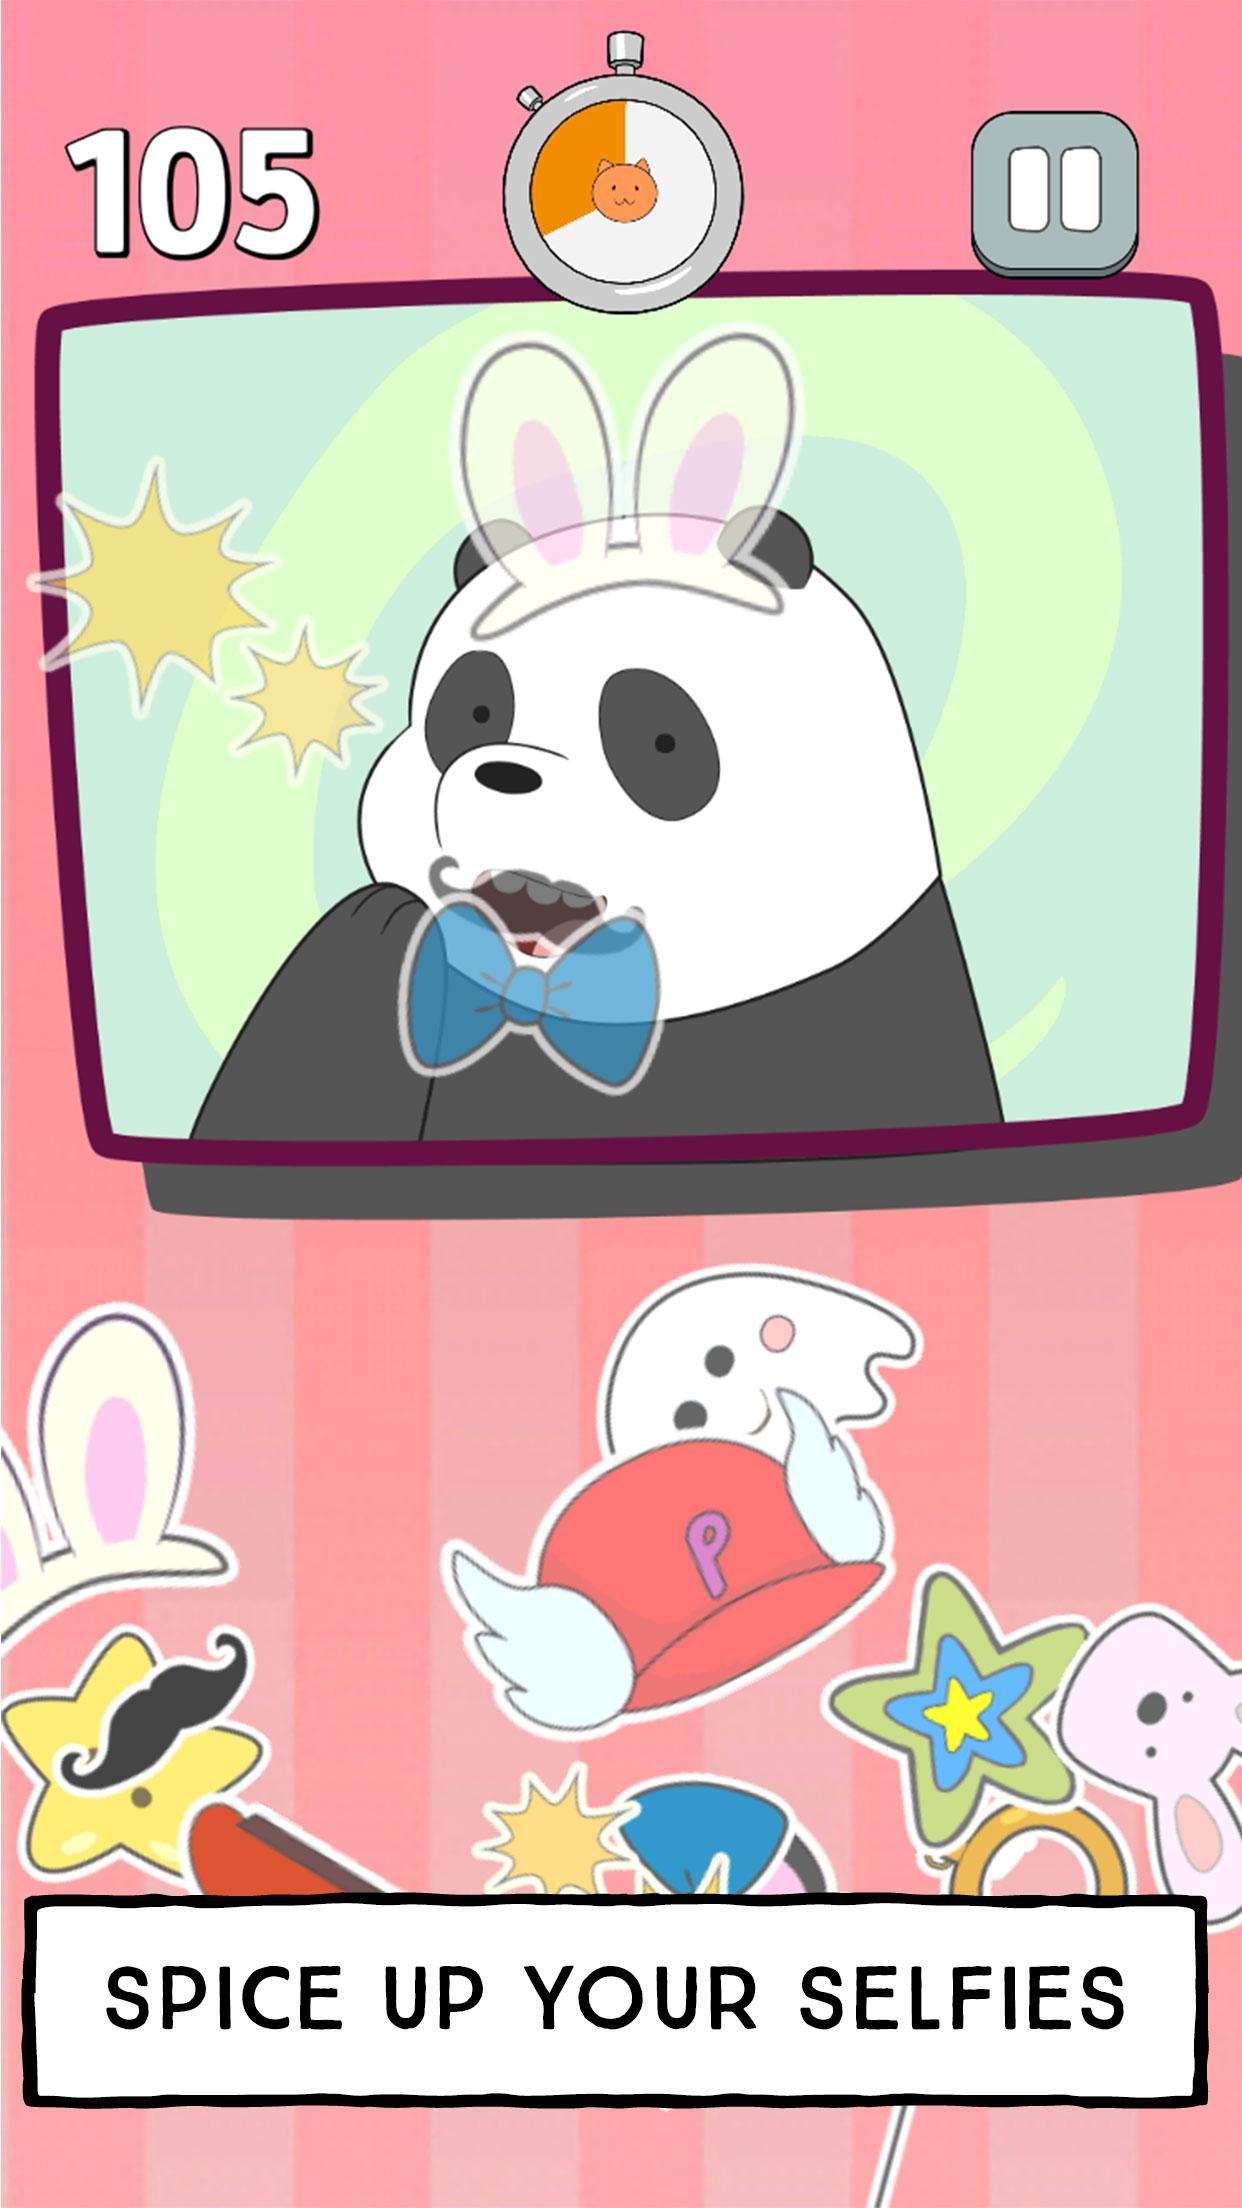 We Bare Bears Free Fur All Mini Game Arcade For Android Apk